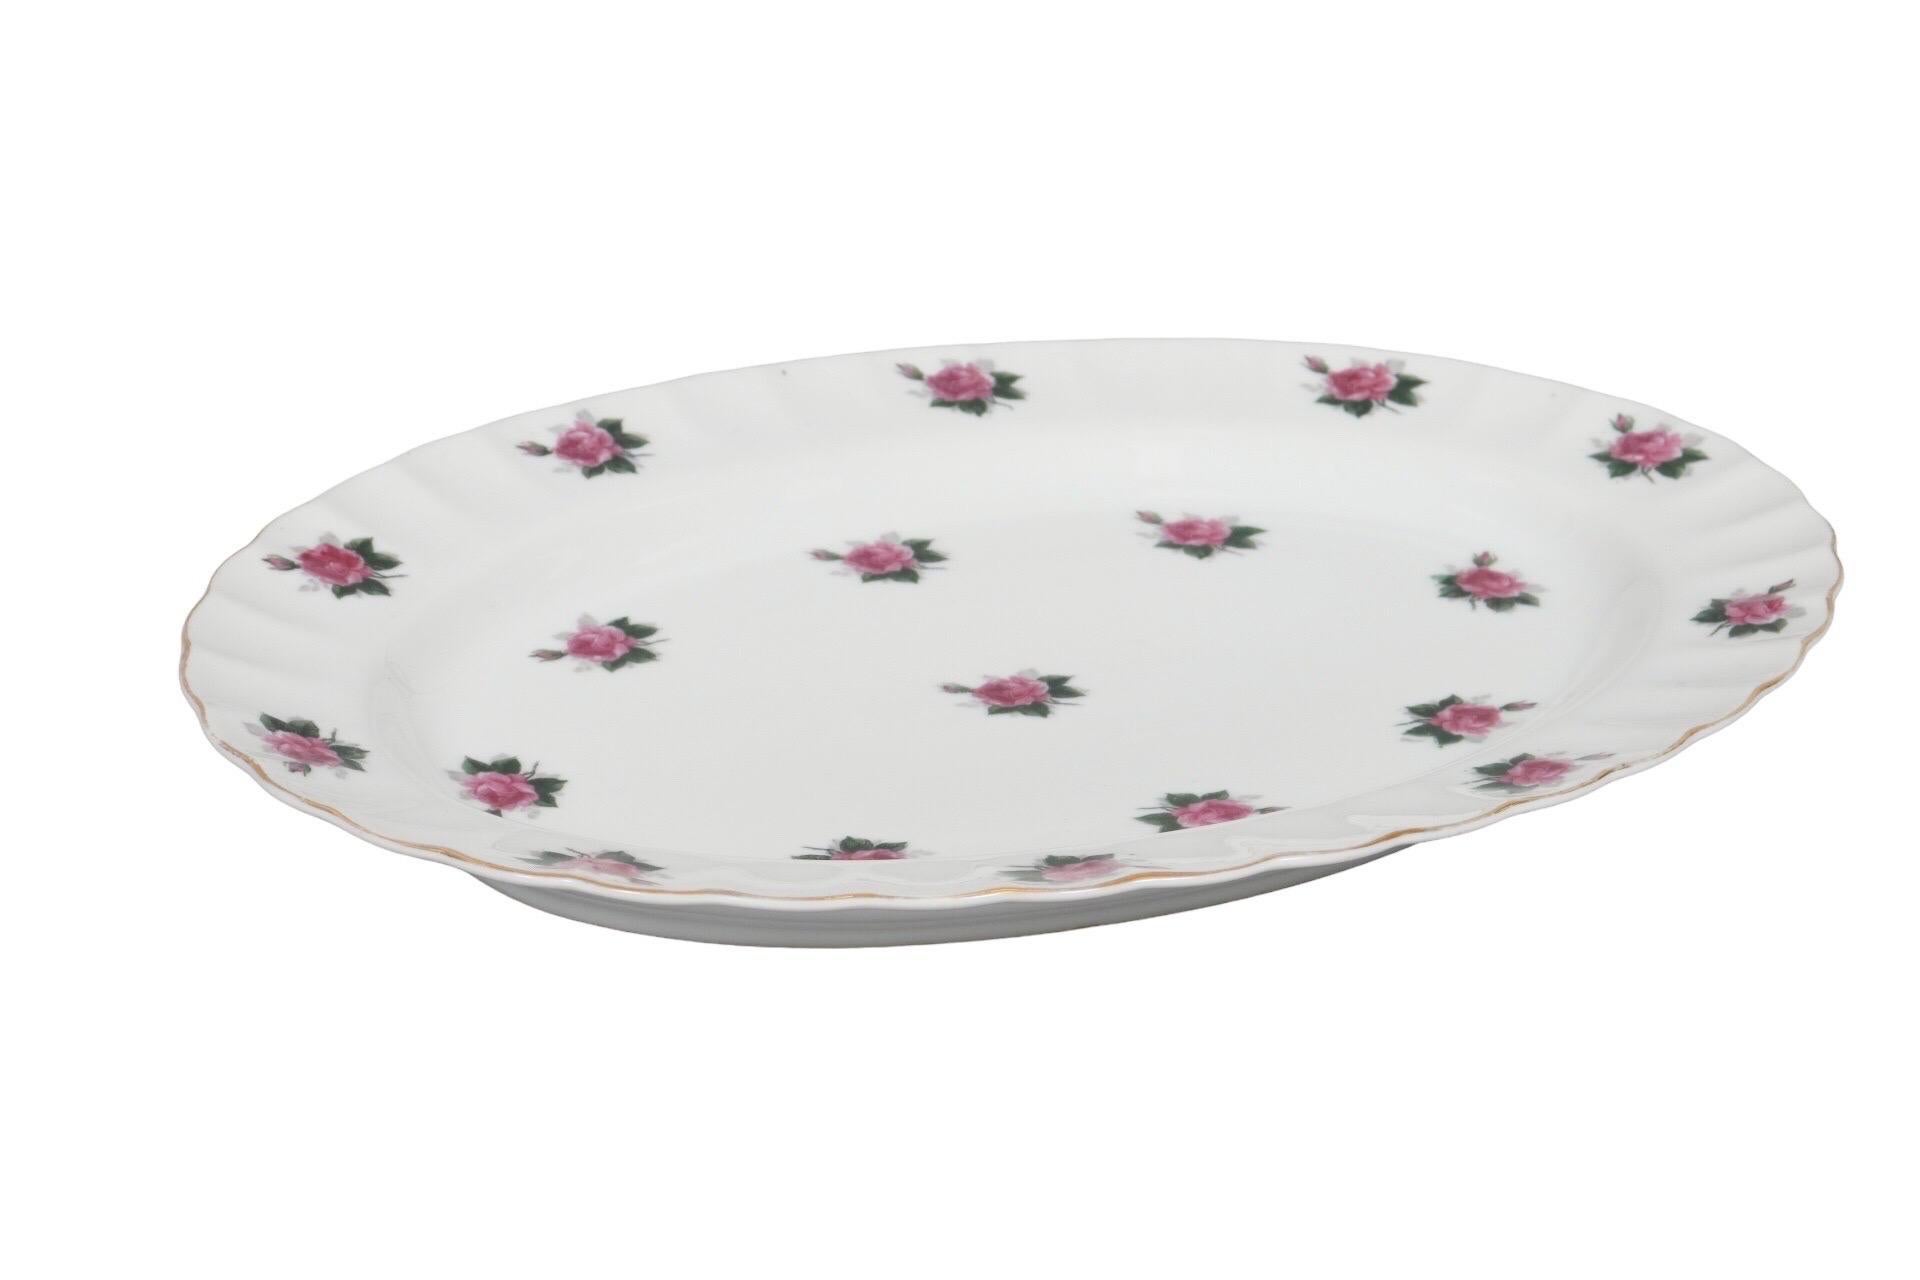 An oval ceramic serving platter made by Bond Ware. Decorated with a repeating pink rose motif and a ruffled lip, edged in gold. Marked Bond Ware Hand Painted underneath.